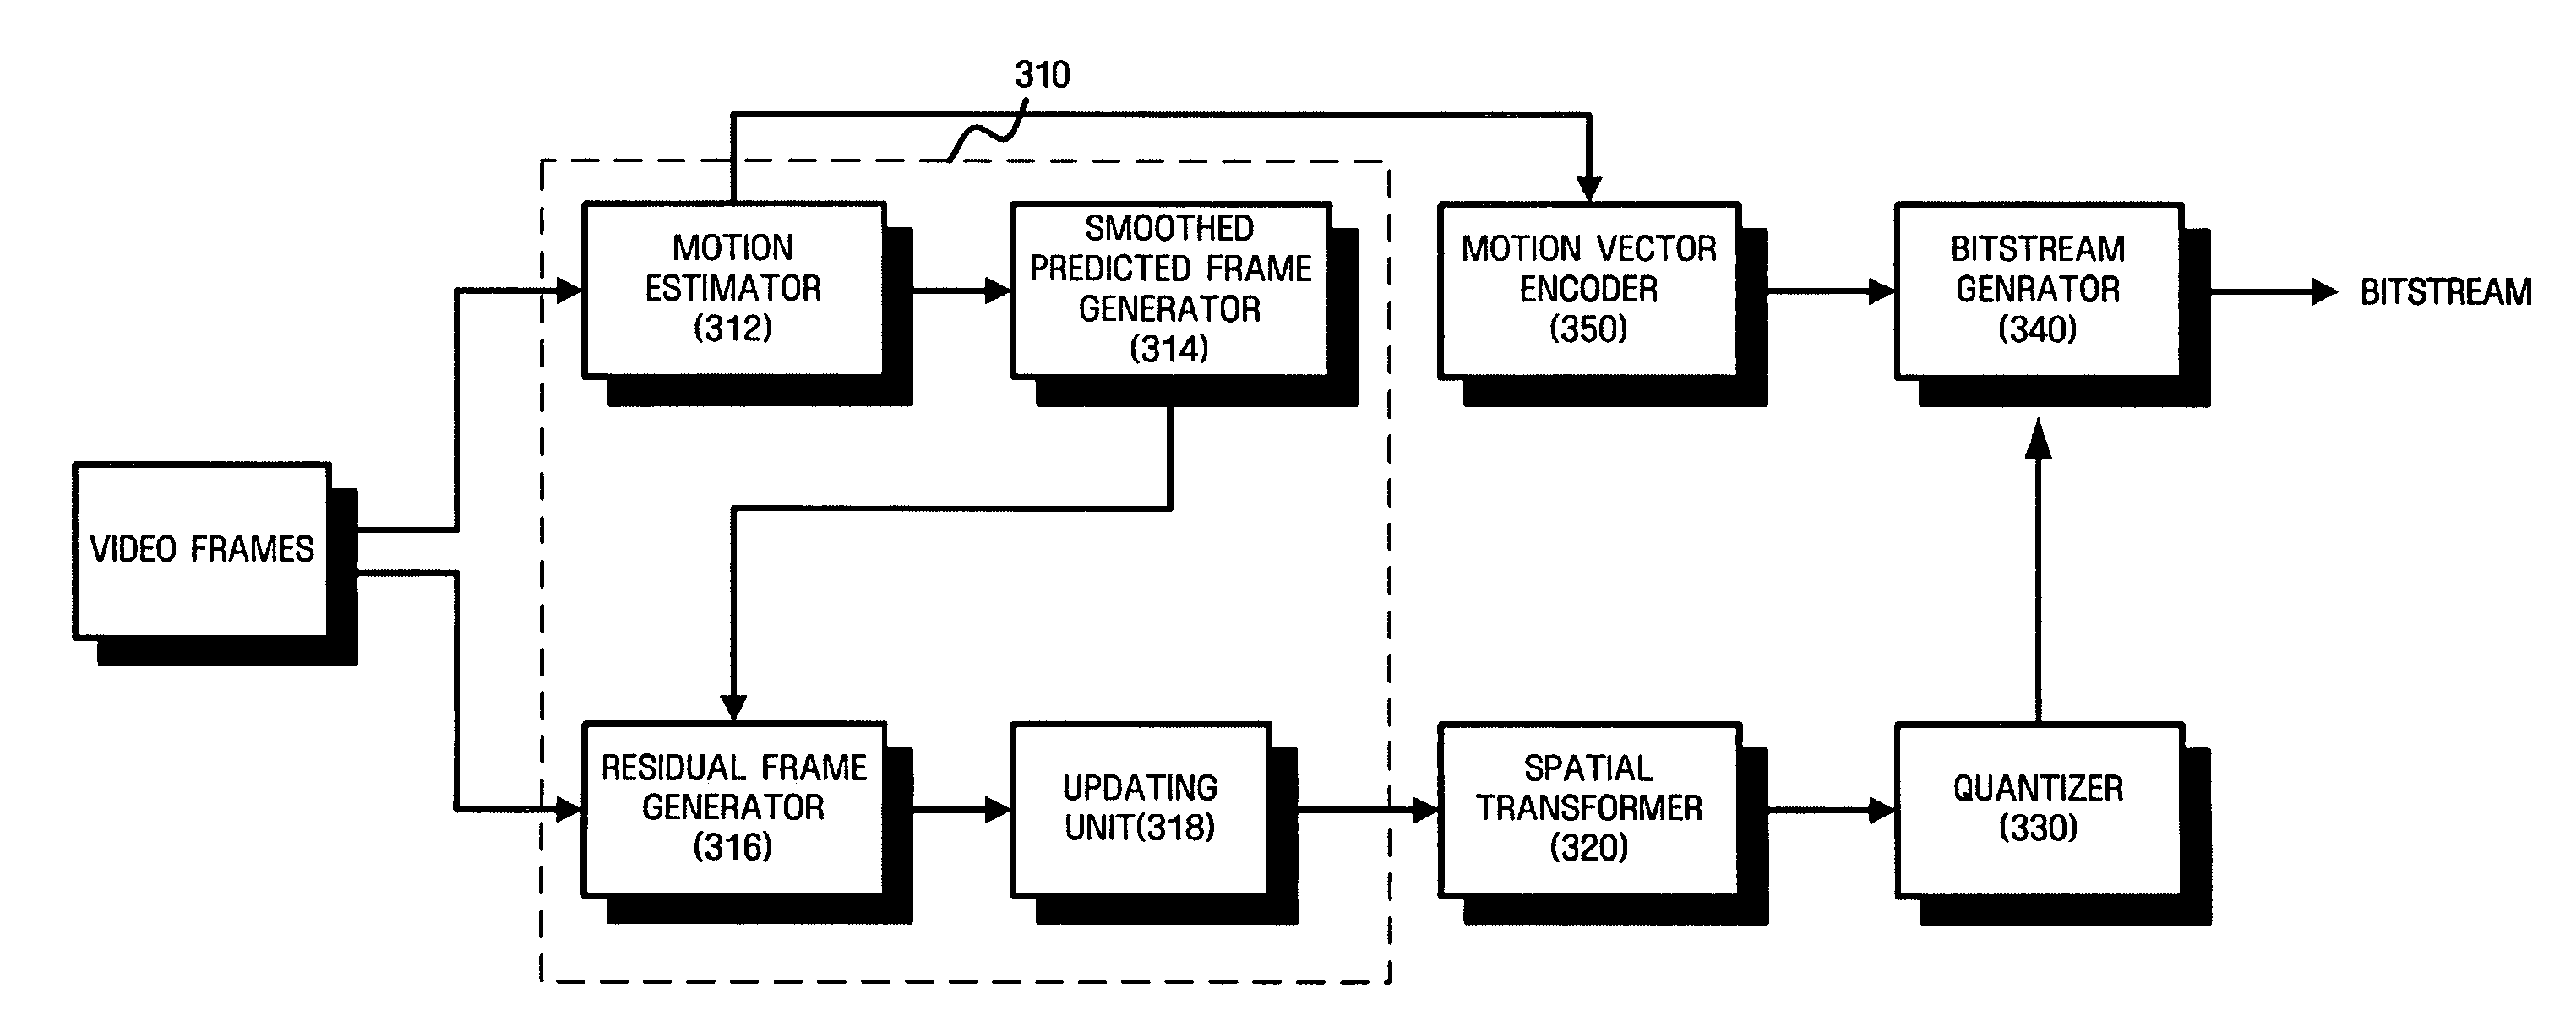 Temporal decomposition and inverse temporal decomposition methods for video encoding and decoding and video encoder and decoder